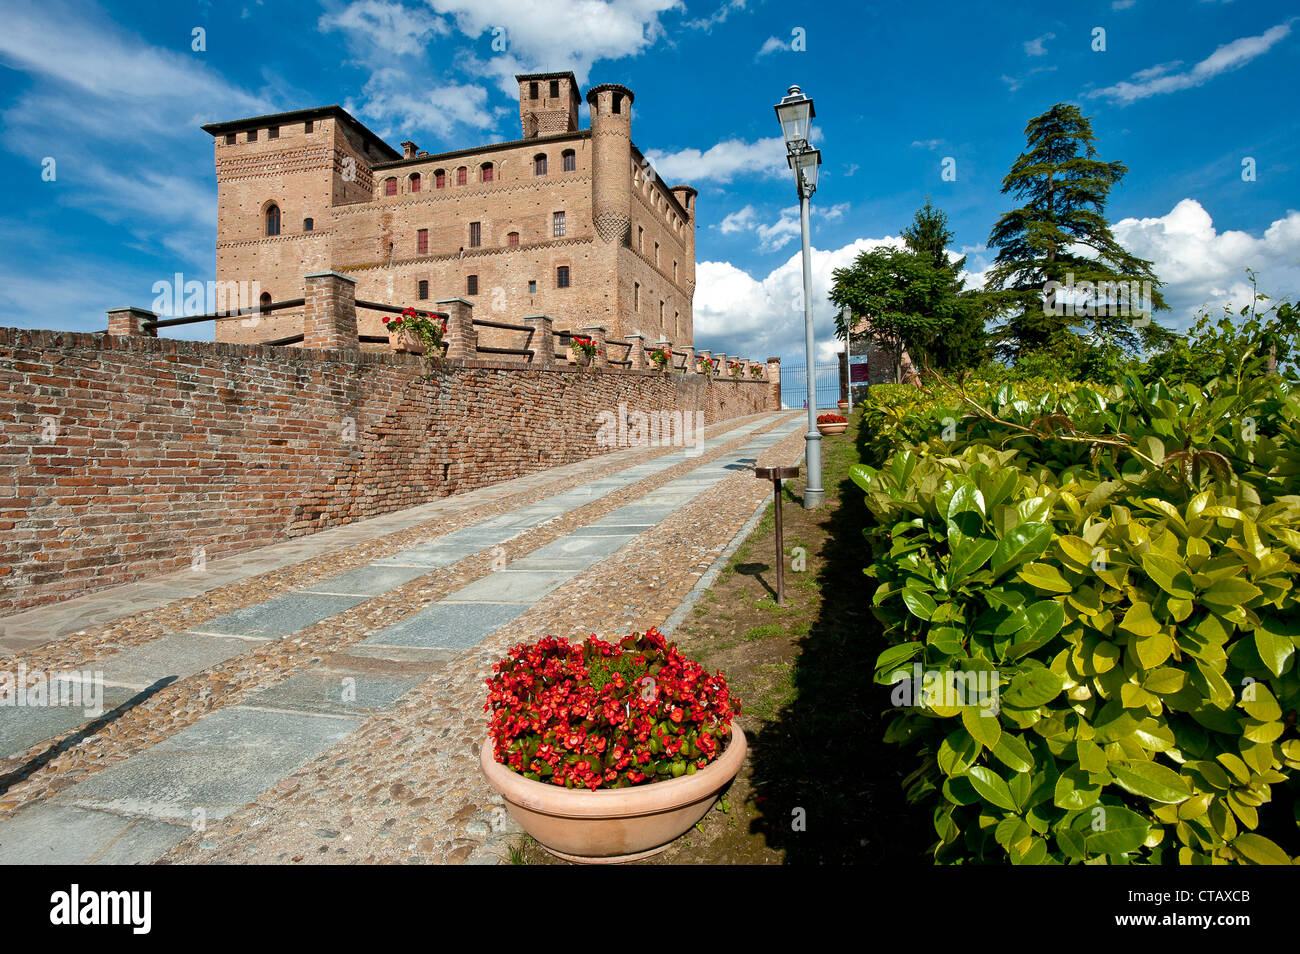 Europe Italy Piedmont Langhe Grinzane Cavour The castle Stock Photo